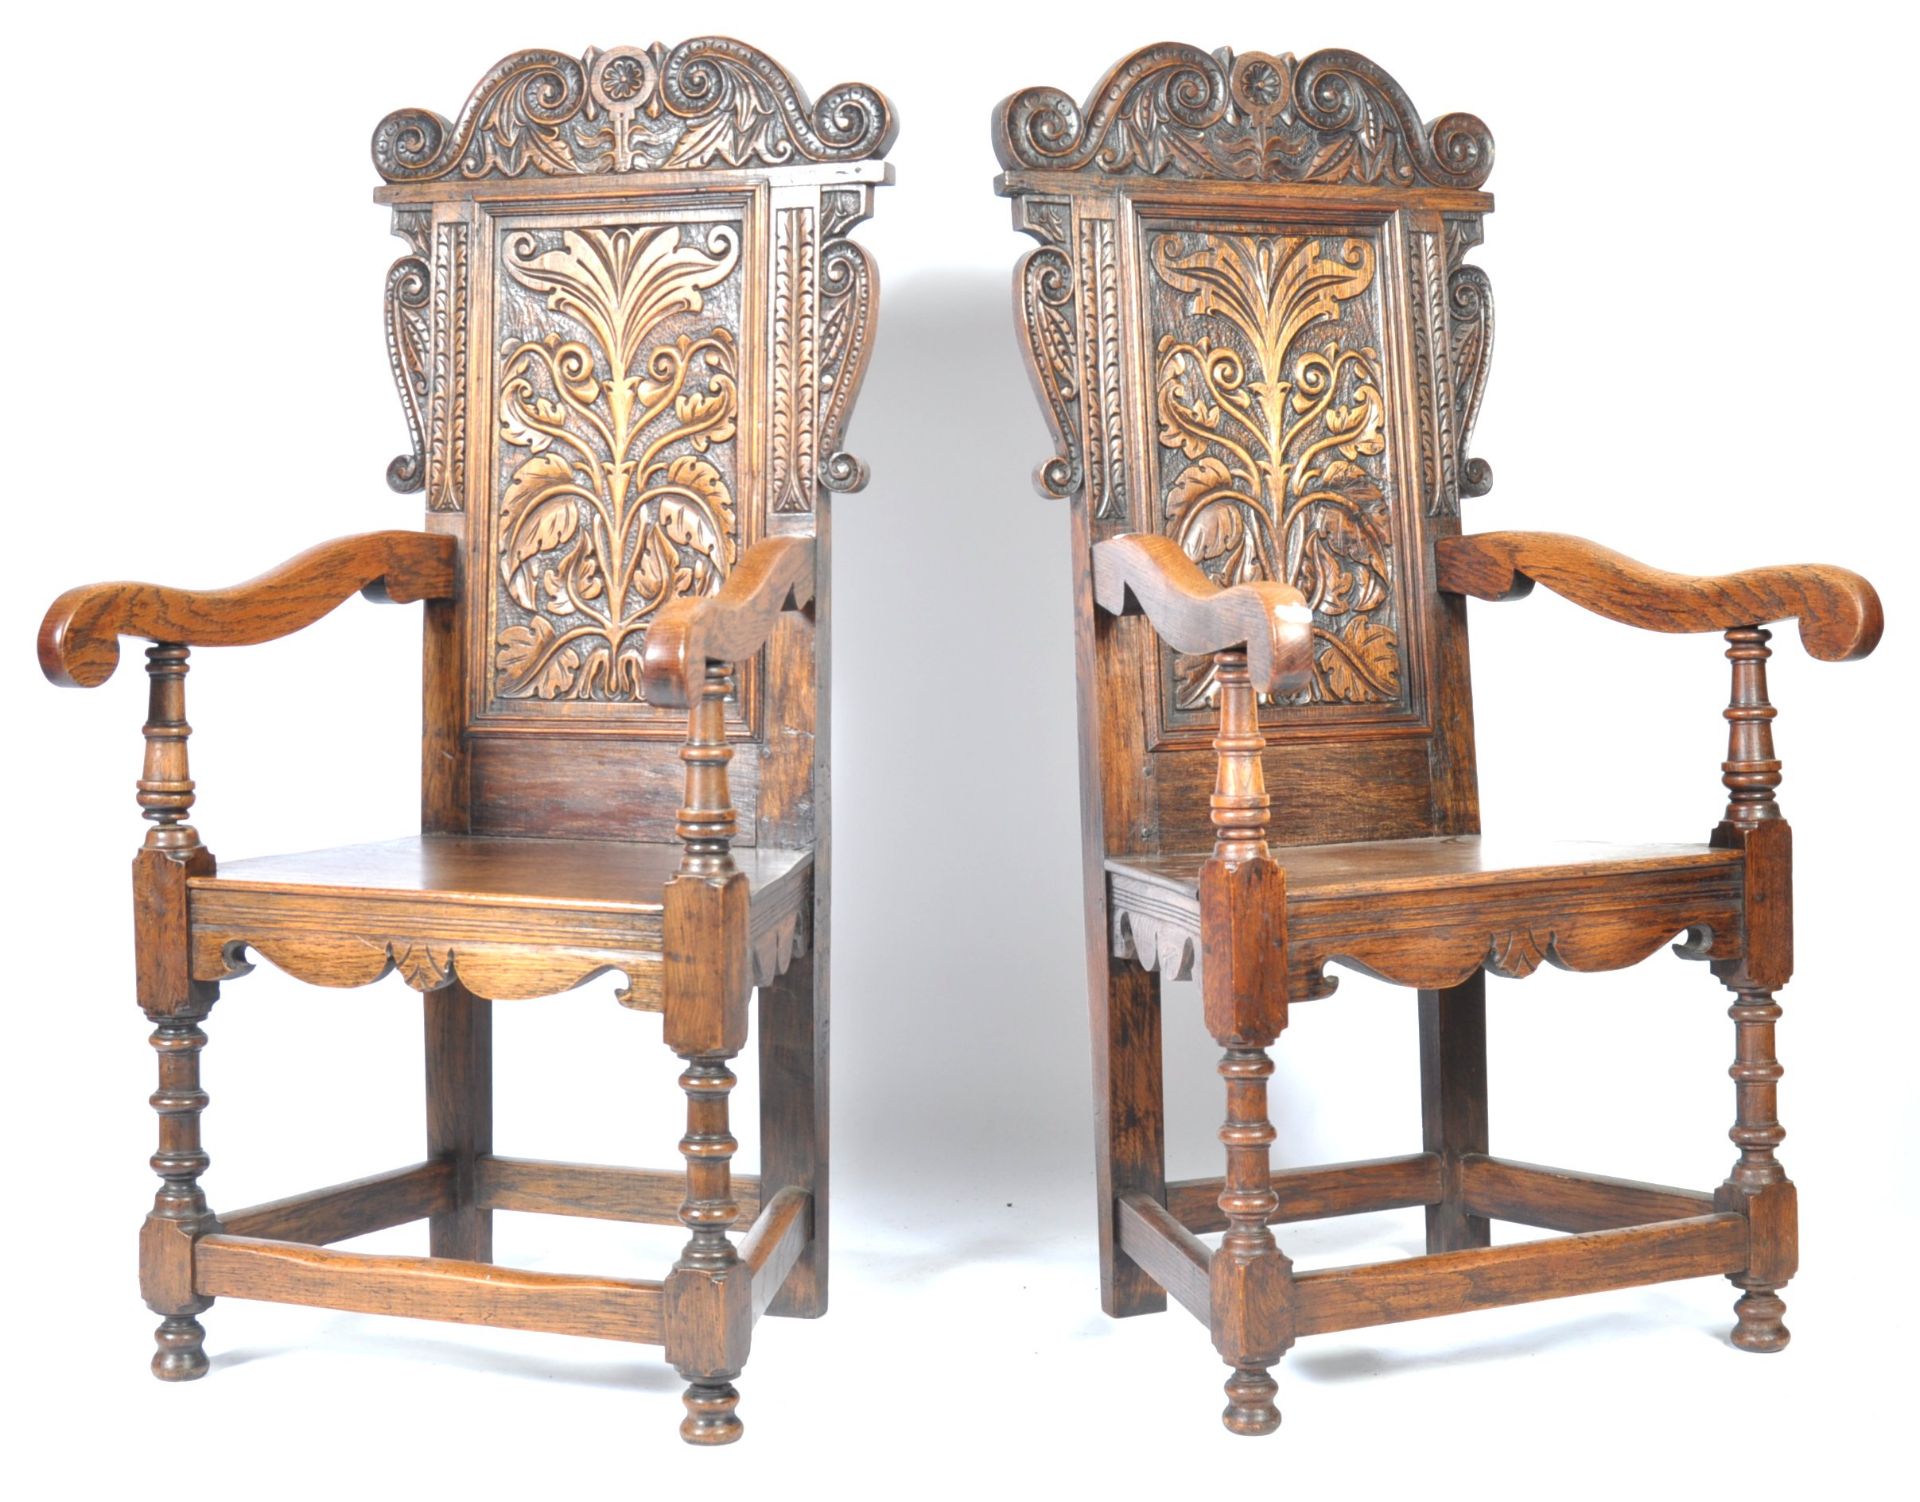 PAIR OF EARLY 20TH CENTURY OAK WAINSCOT CHAIRS